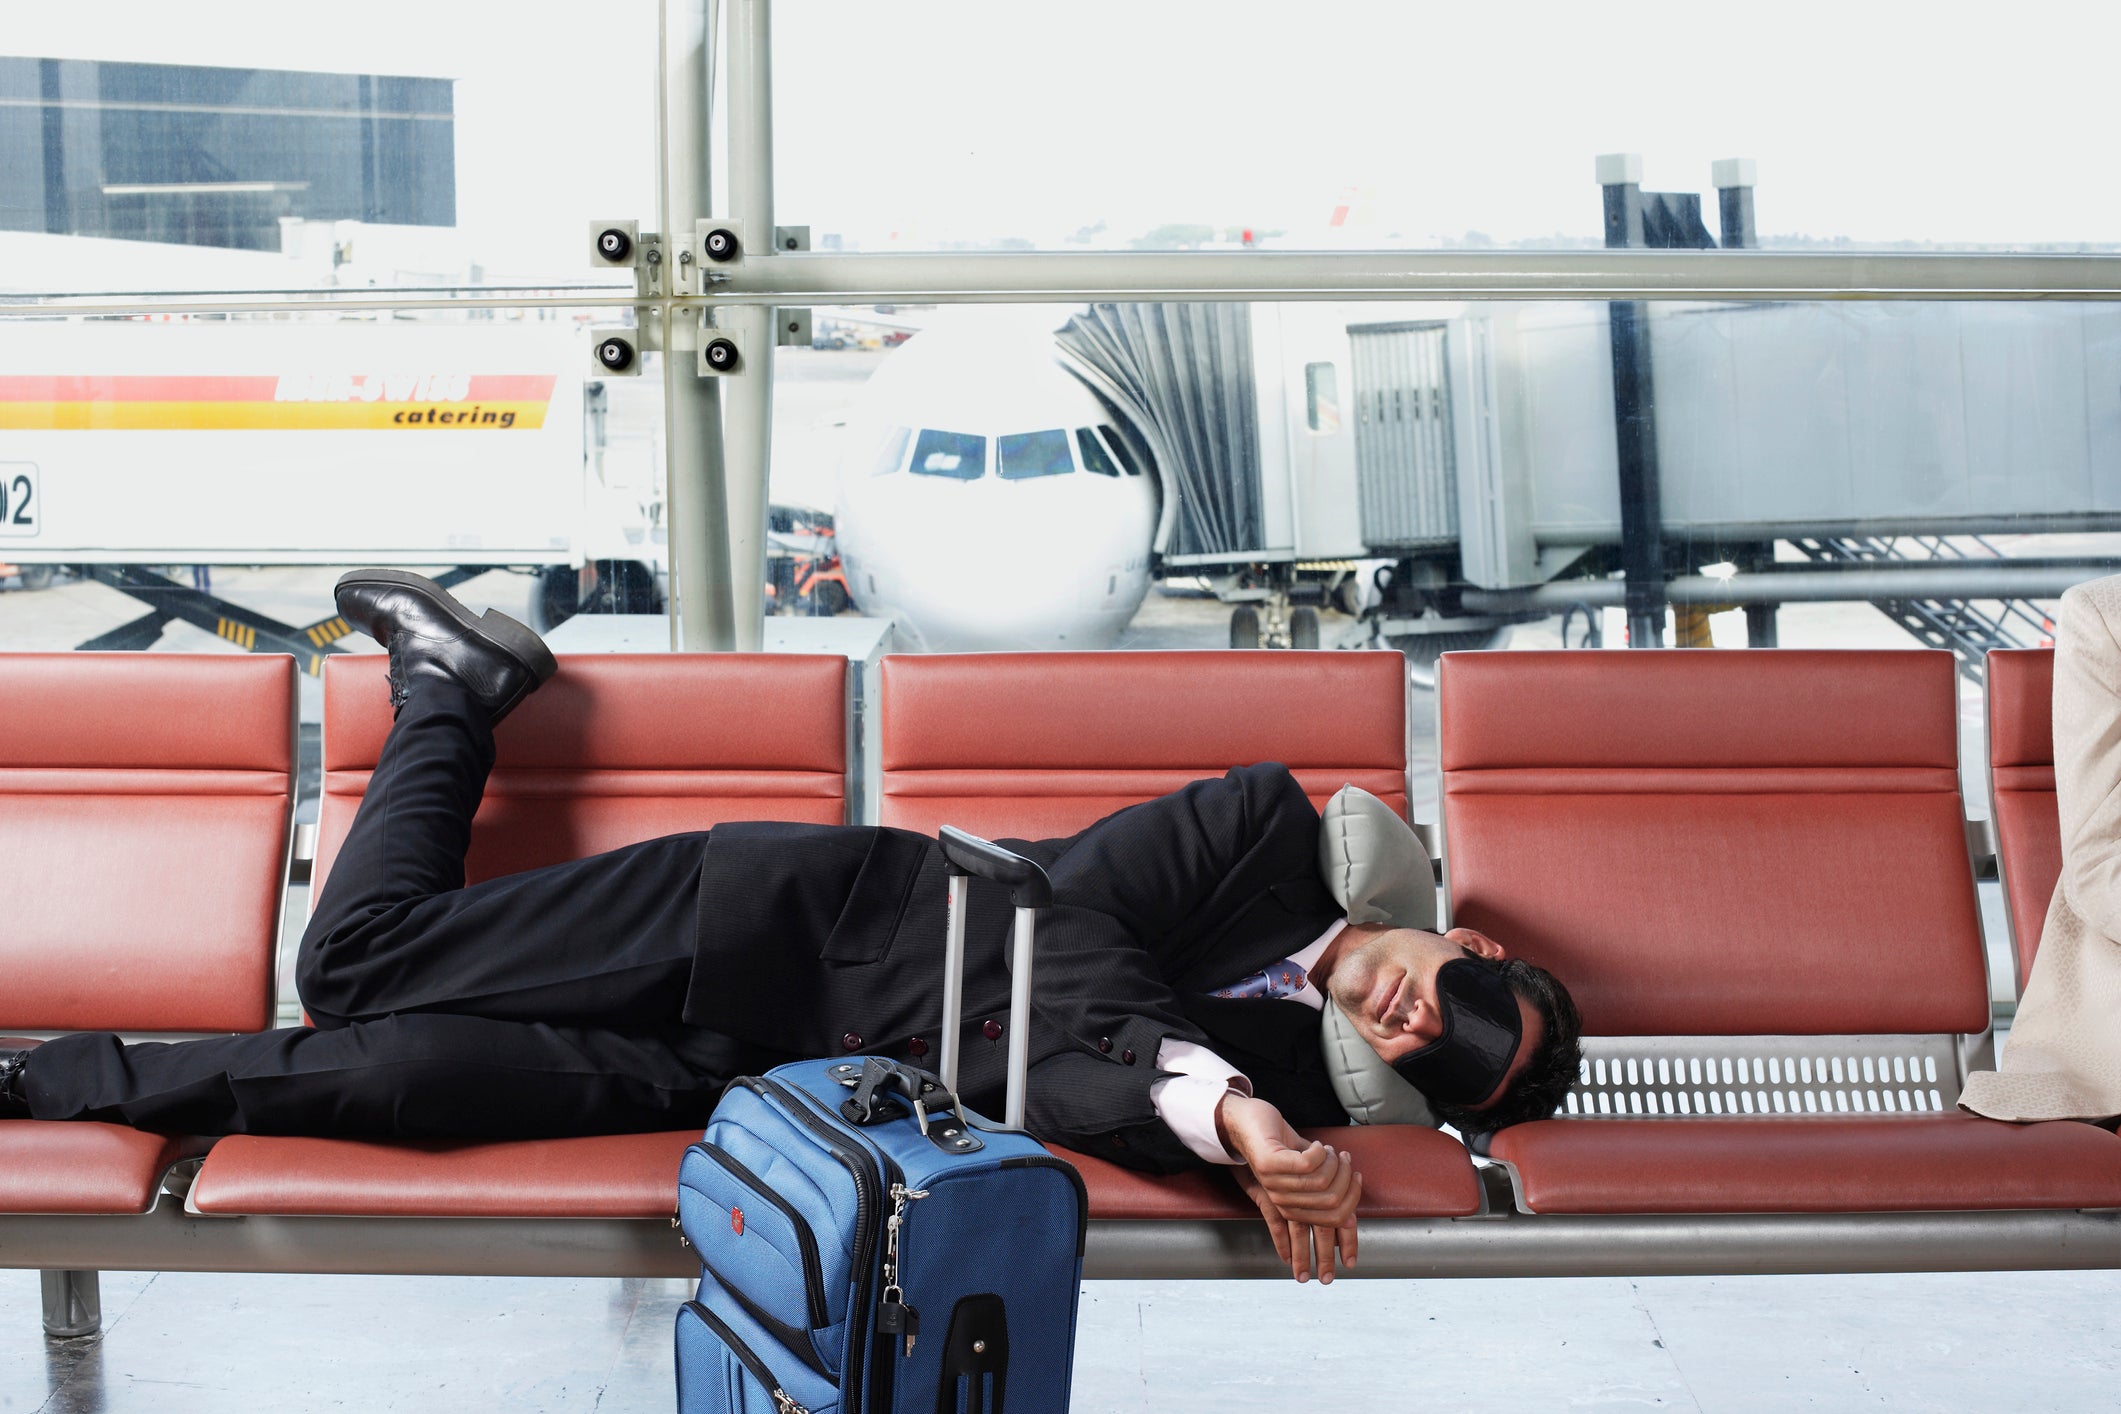 person sleeps on chairs in airport